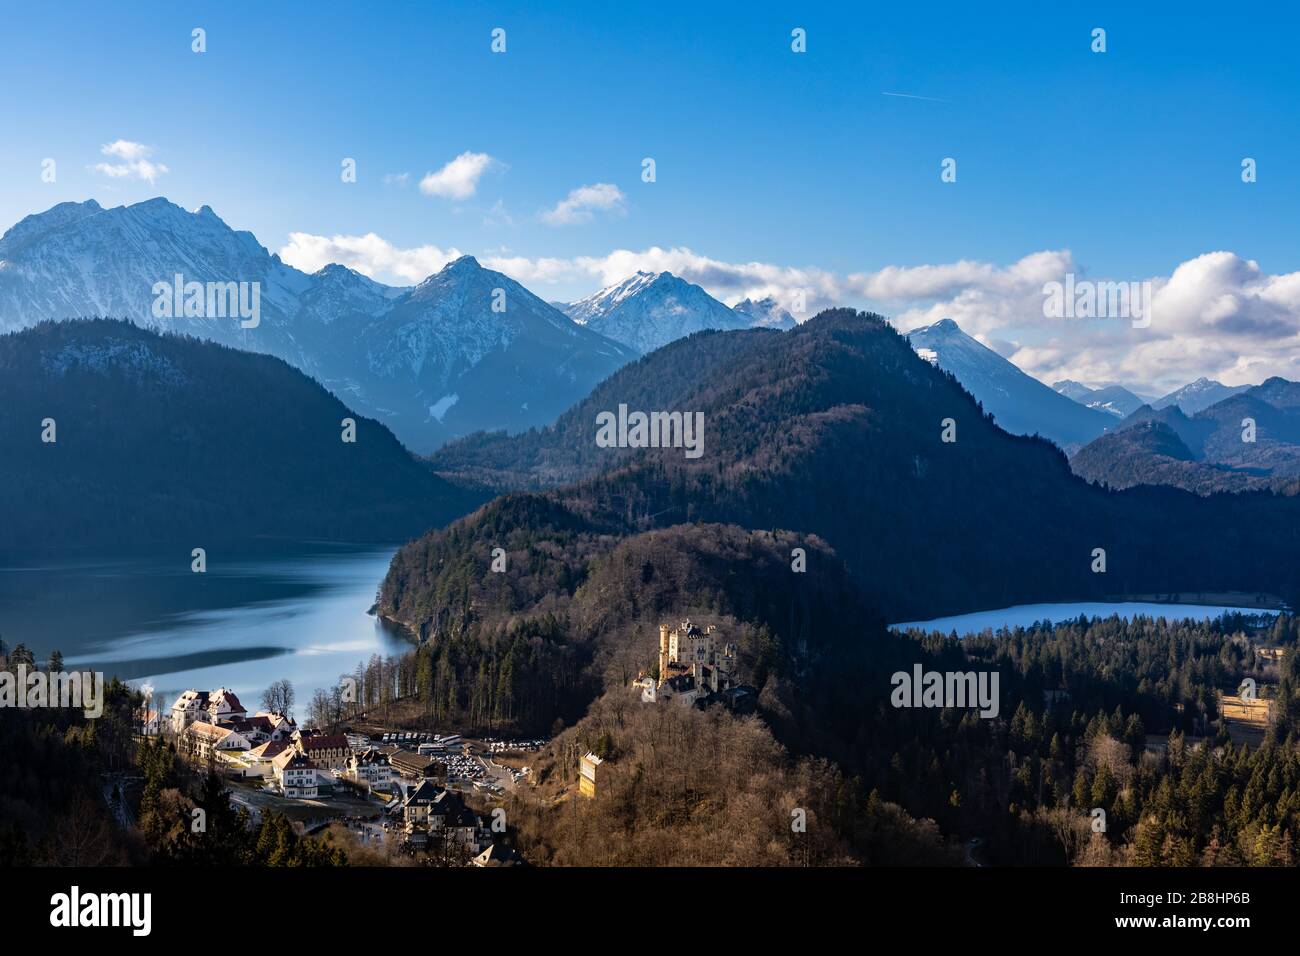 Panorama view of the Bavarian Alps and Lake with the famous Hohenschwangau Castle and Alpsee lake, Schwansee lake on a sunny day in winter, Schwangau, Stock Photo